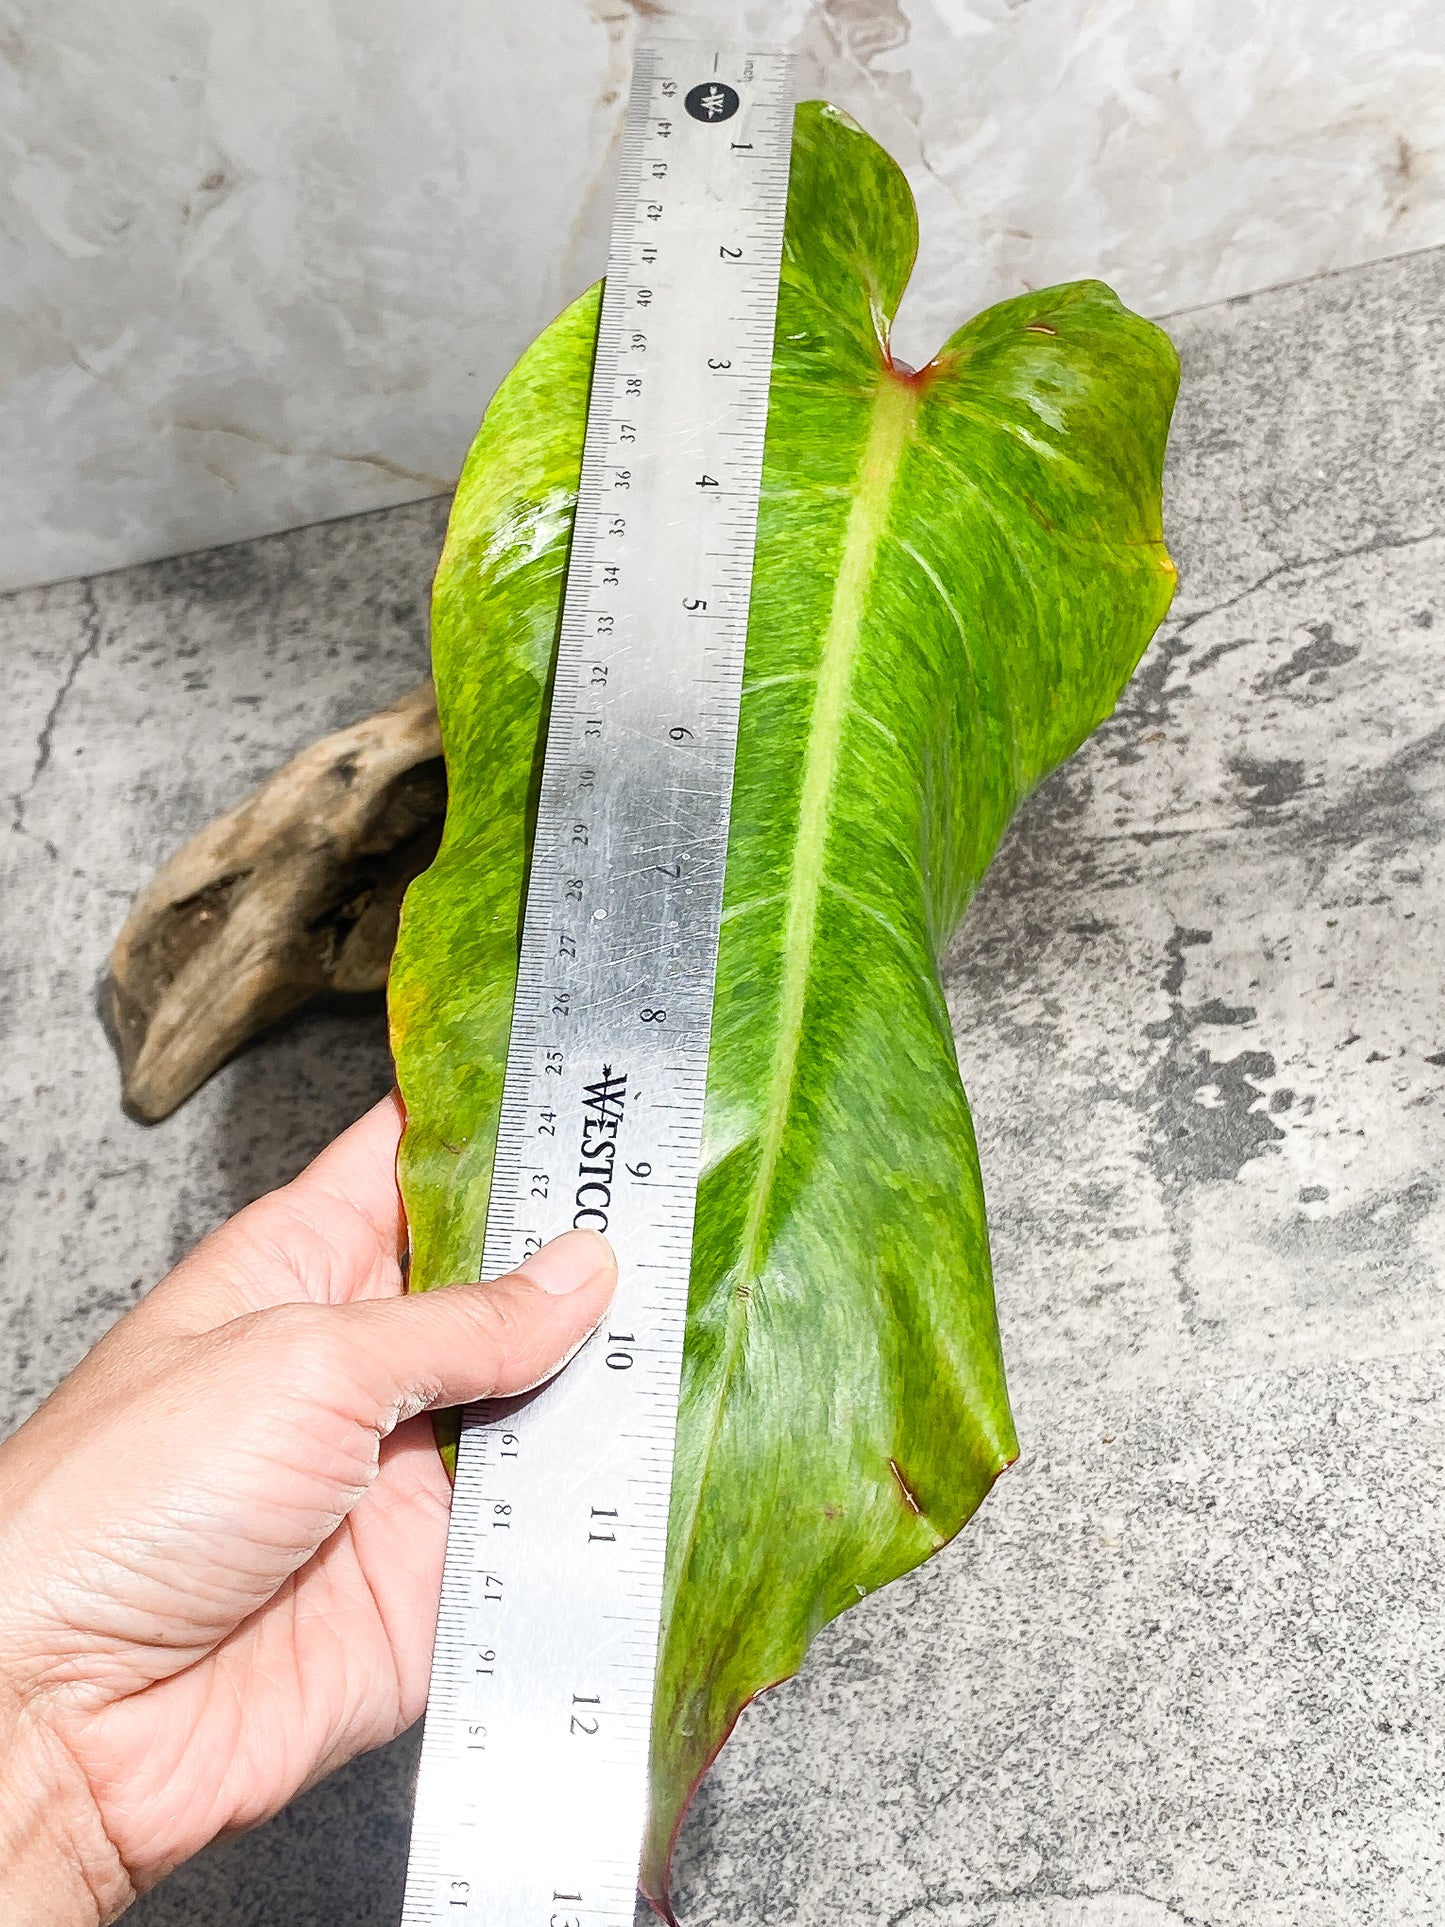 Philodendron Orange Marmalade 1 giant leaf (13") 1 sprout Rooting Top Cutting